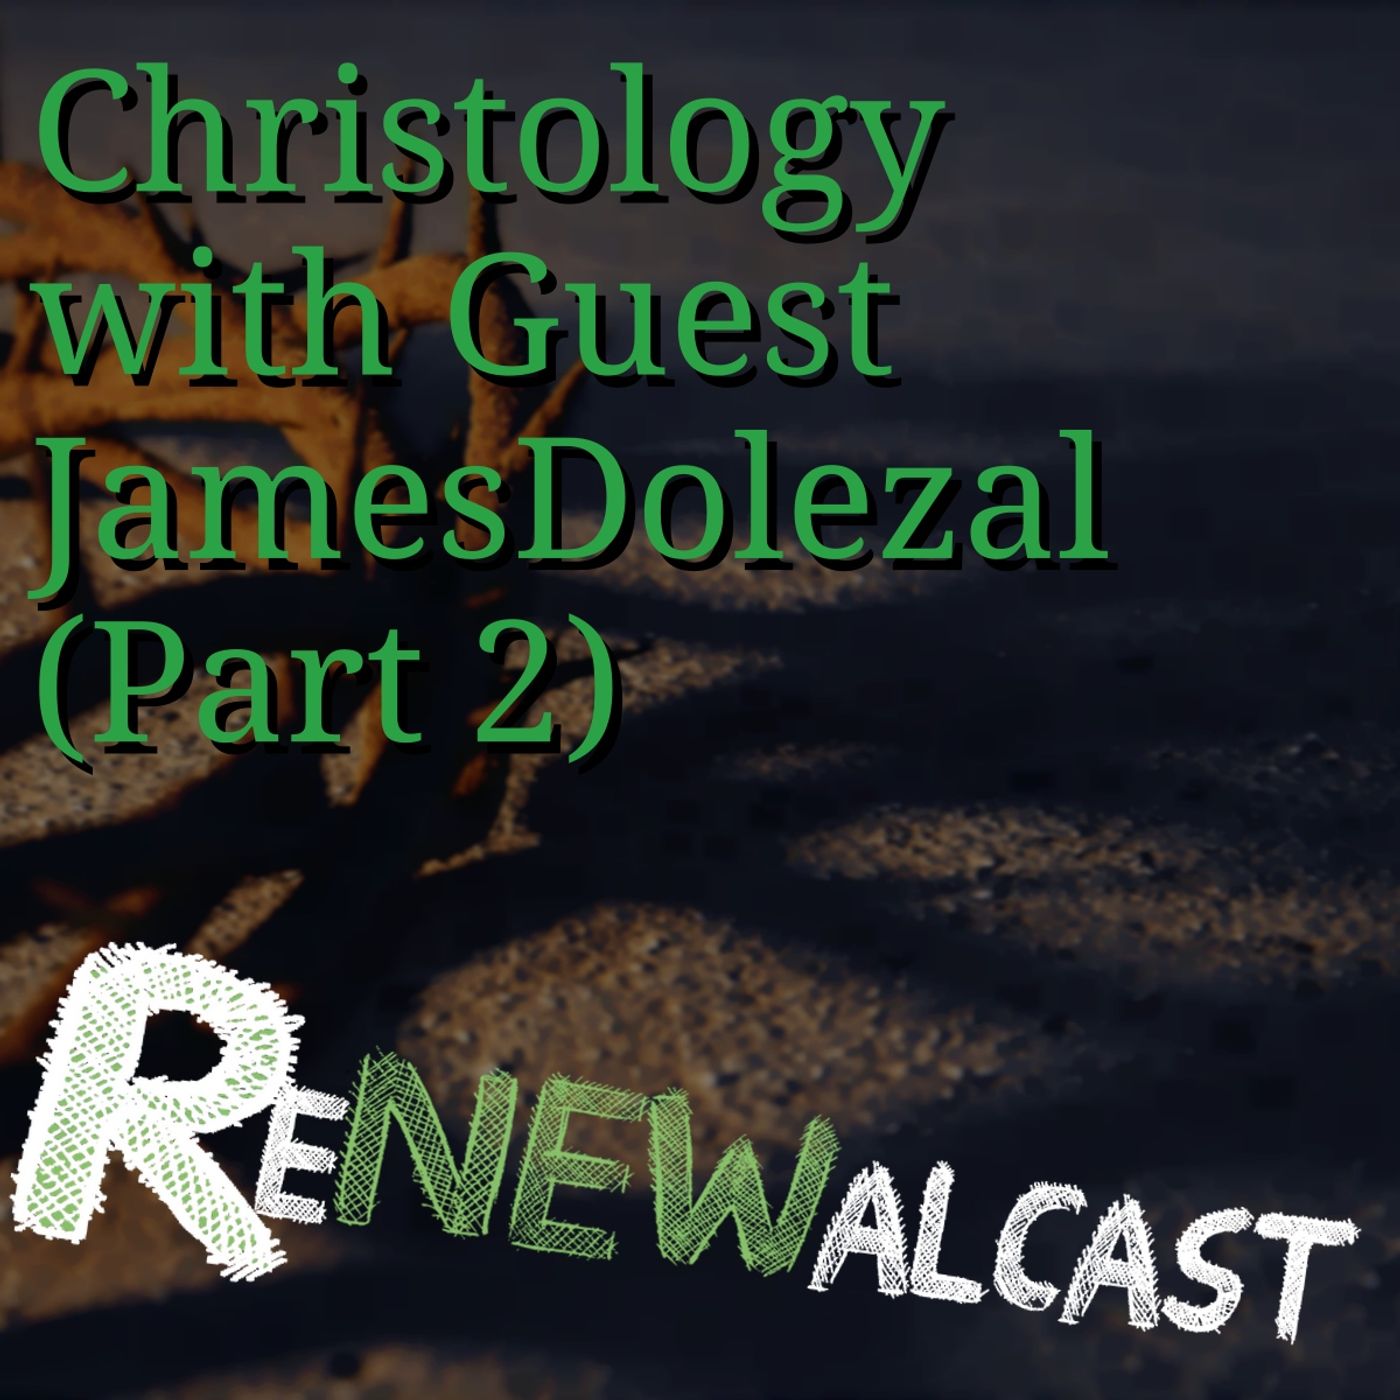 Christology with Guest James Dolezal (Part 2)